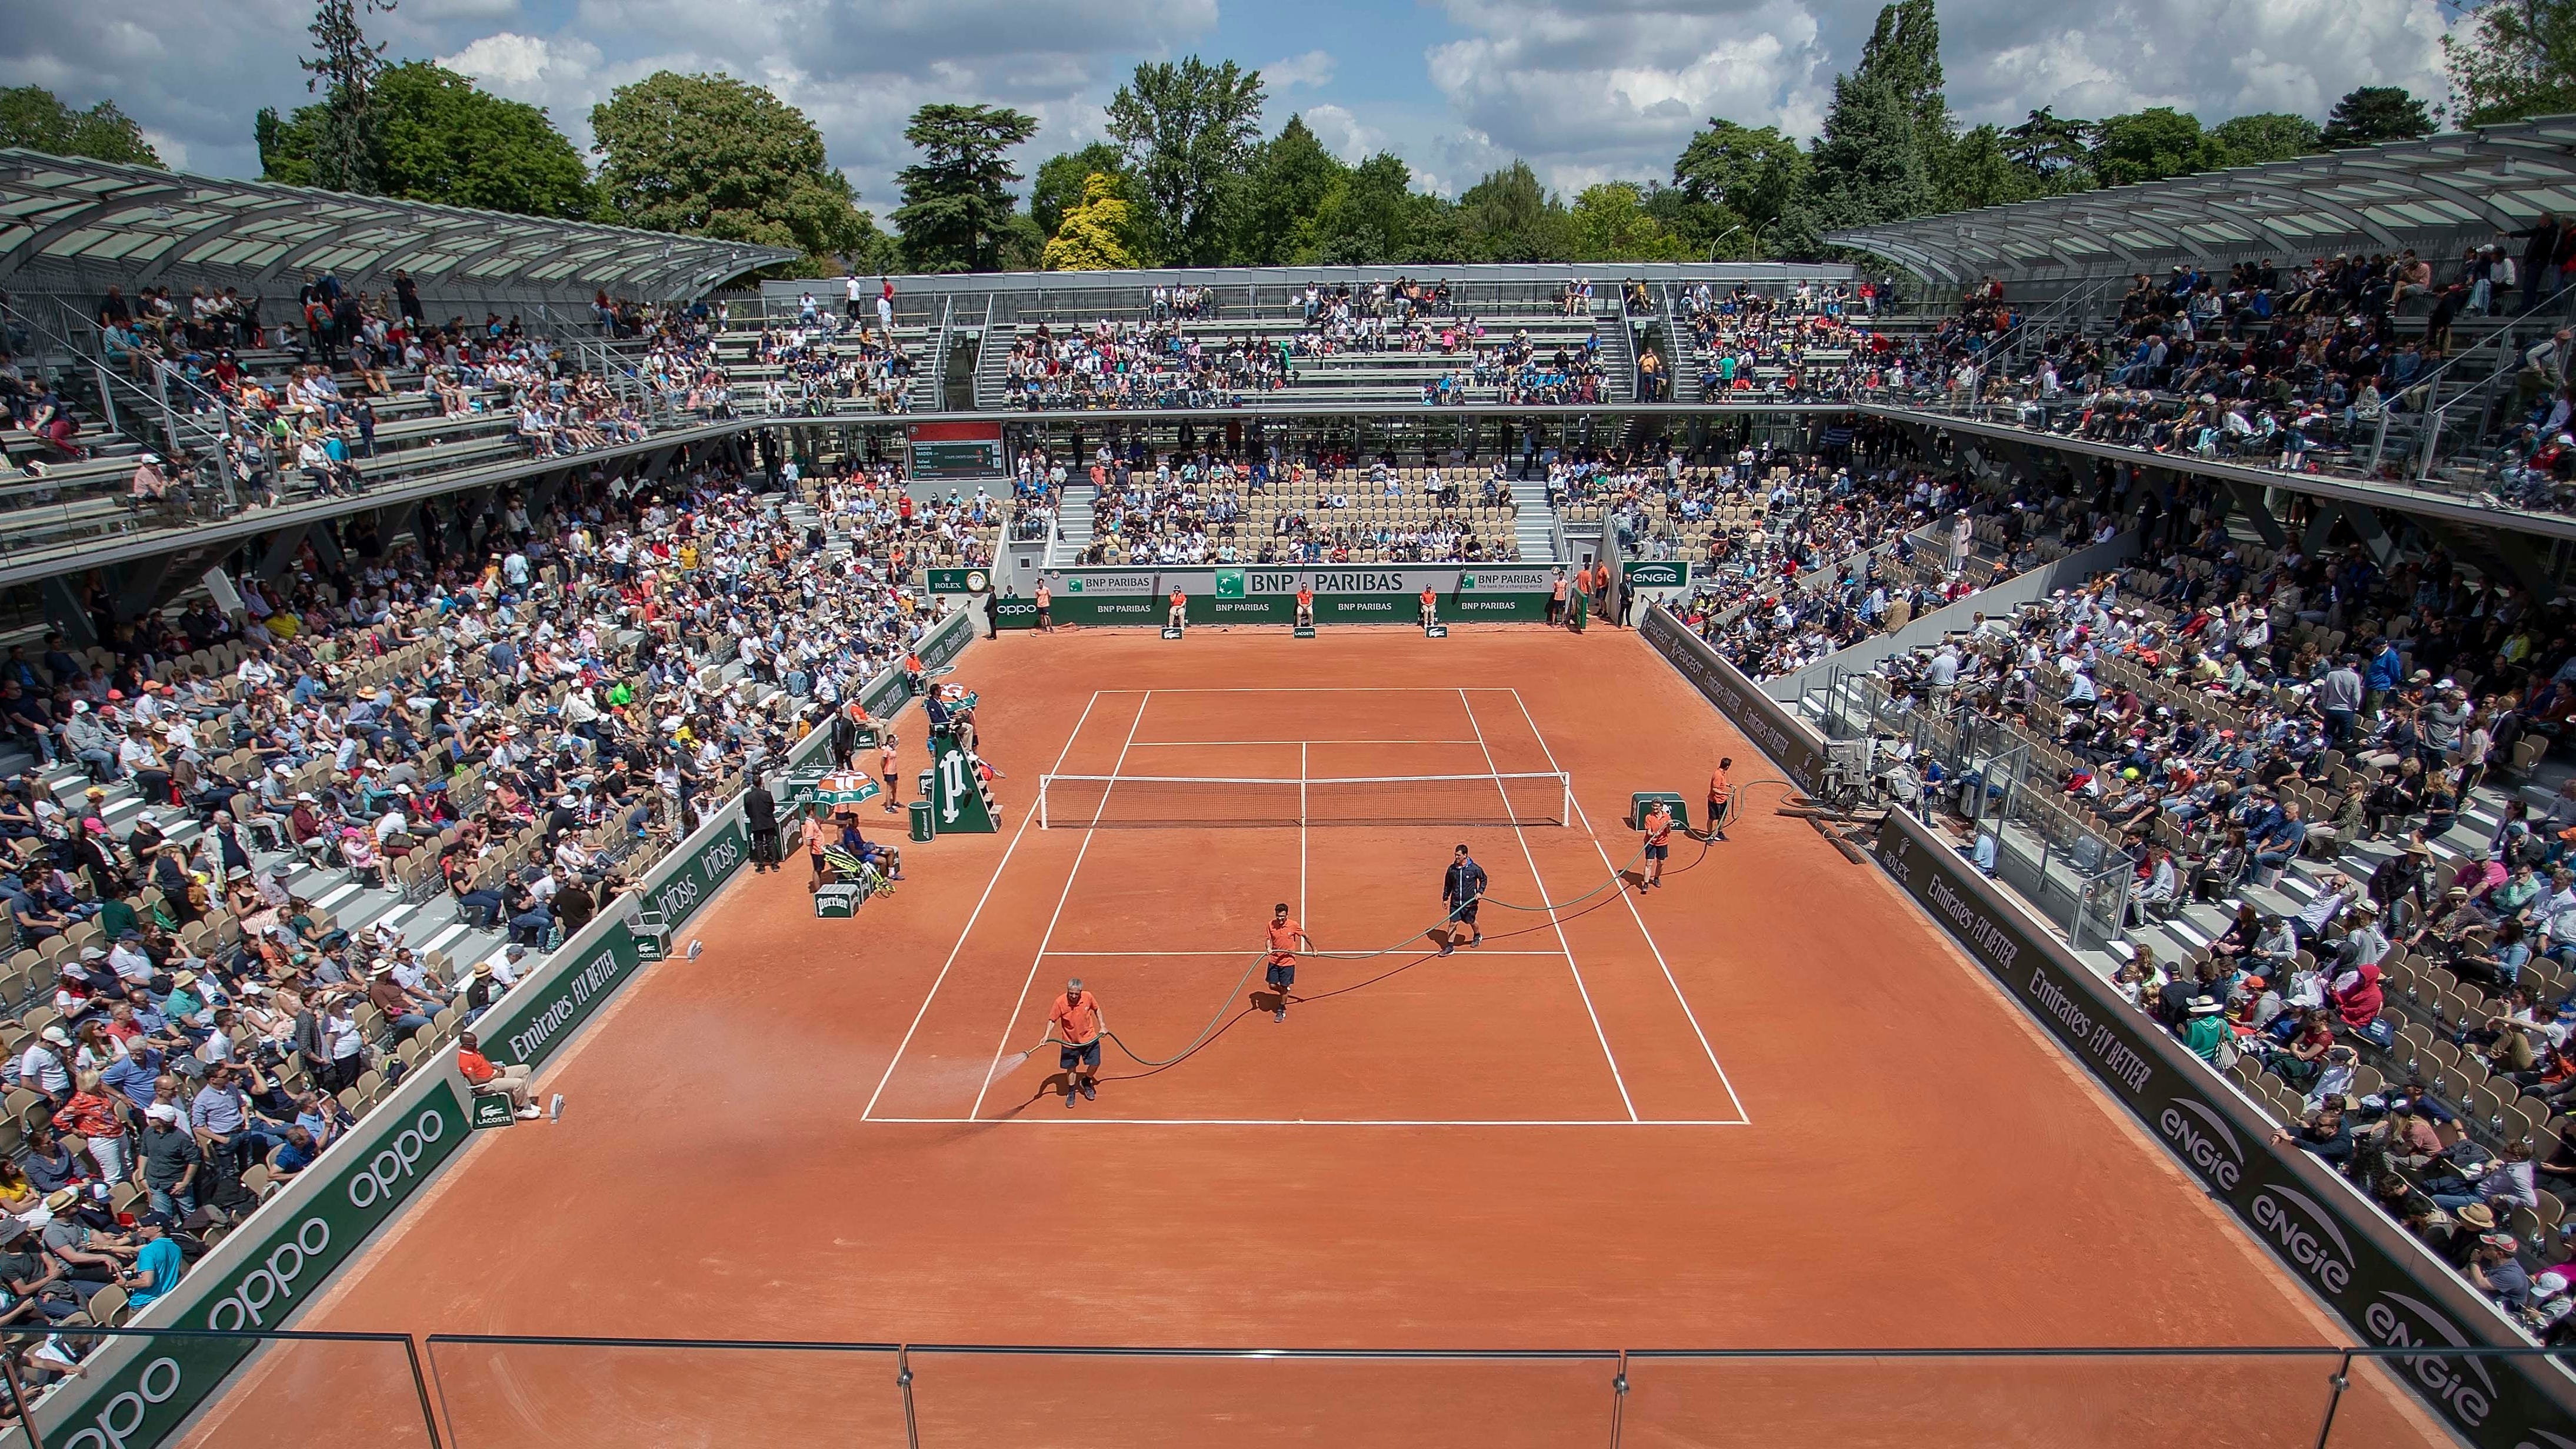 French Open: No tennis at Roland Garros with coronavirus pandemic